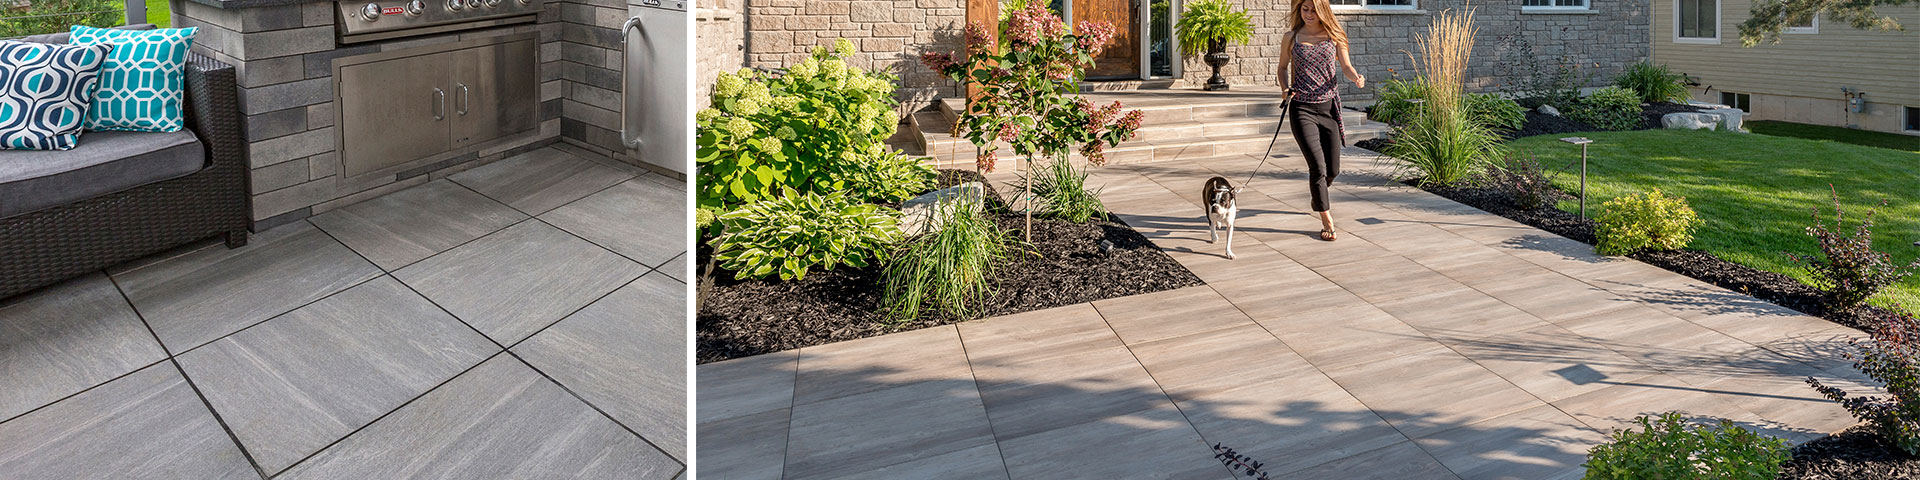 Two Images Showcasing Porcelain Tile for Outdoor Kitchen and for Front Walkway with Person Walking Dog